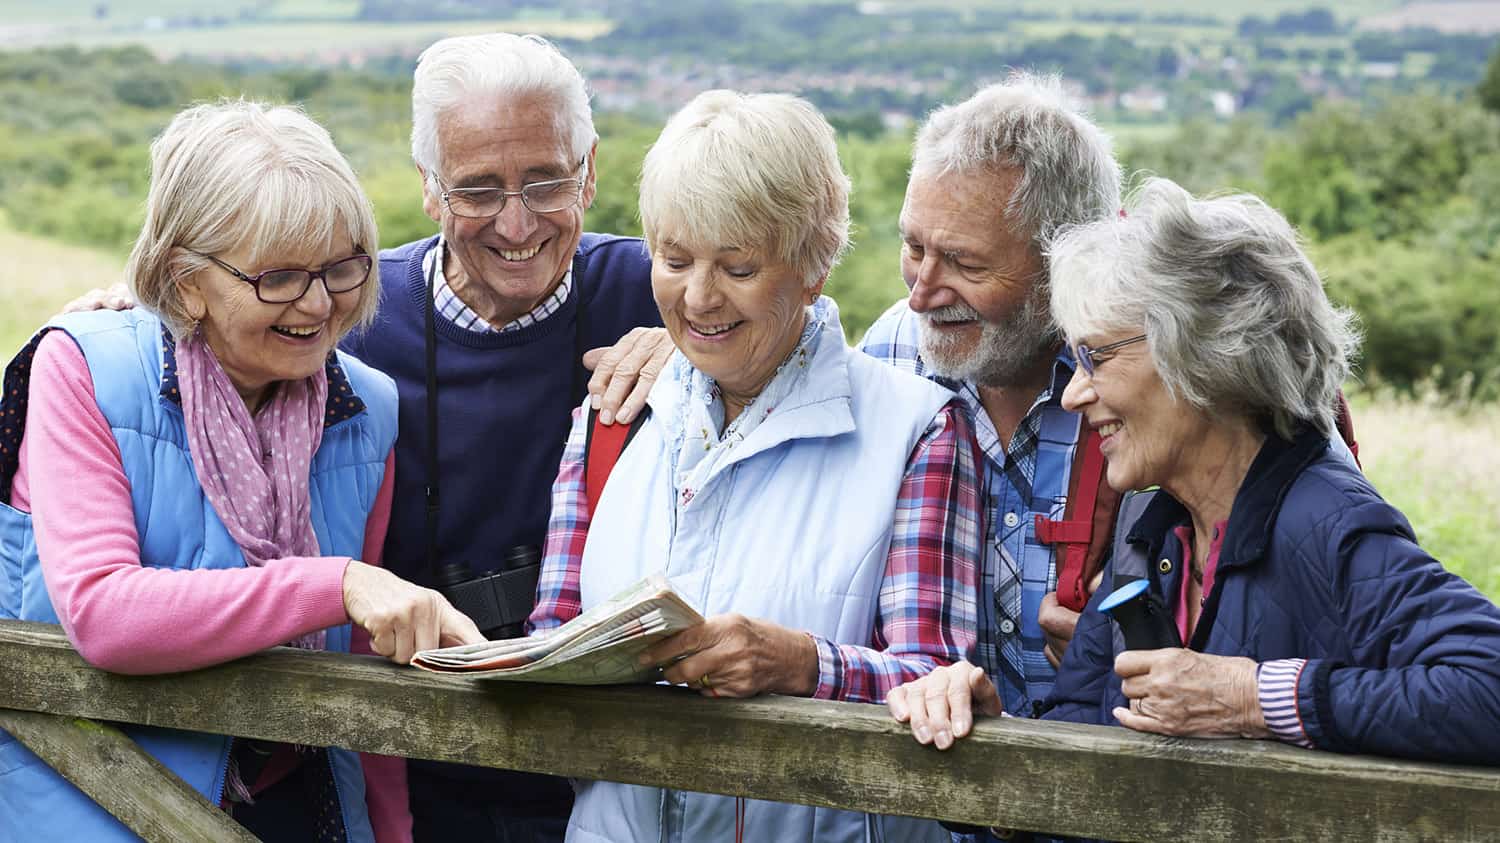 5 Unexpected Places to Meet New People in Retirement